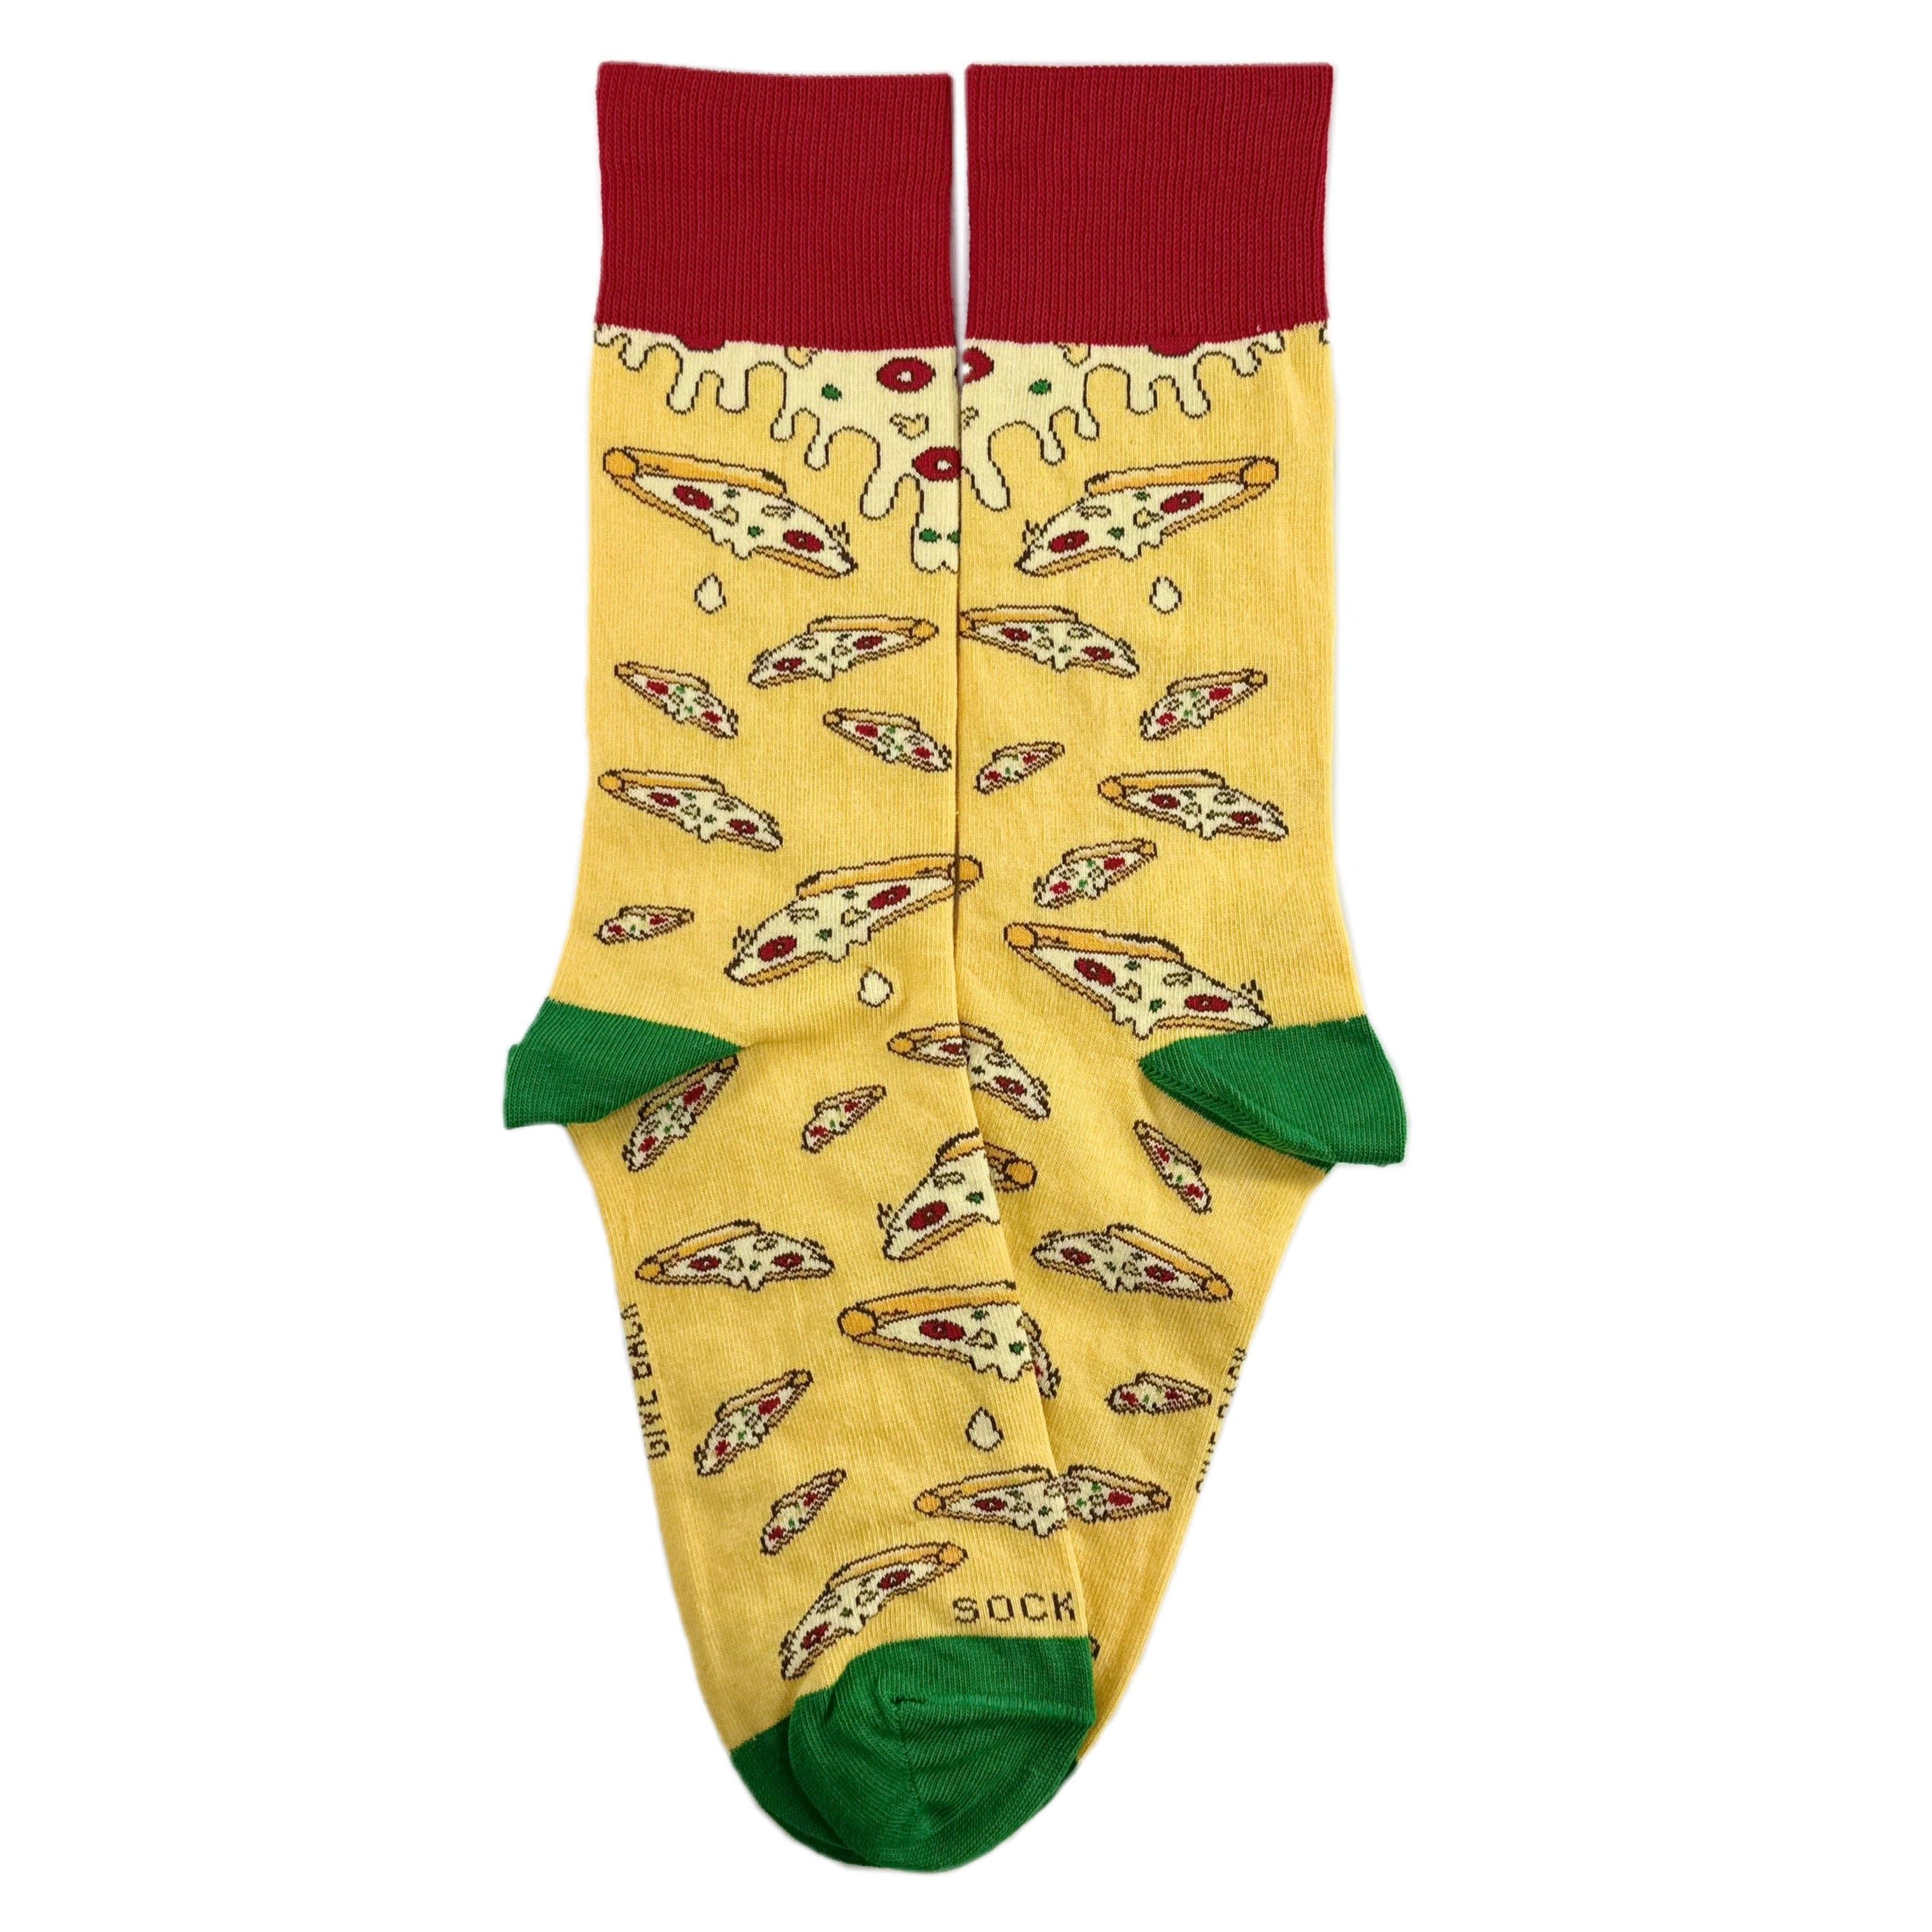 Cheesy Pizza Pattern Socks from the Sock Panda (Adult Large)